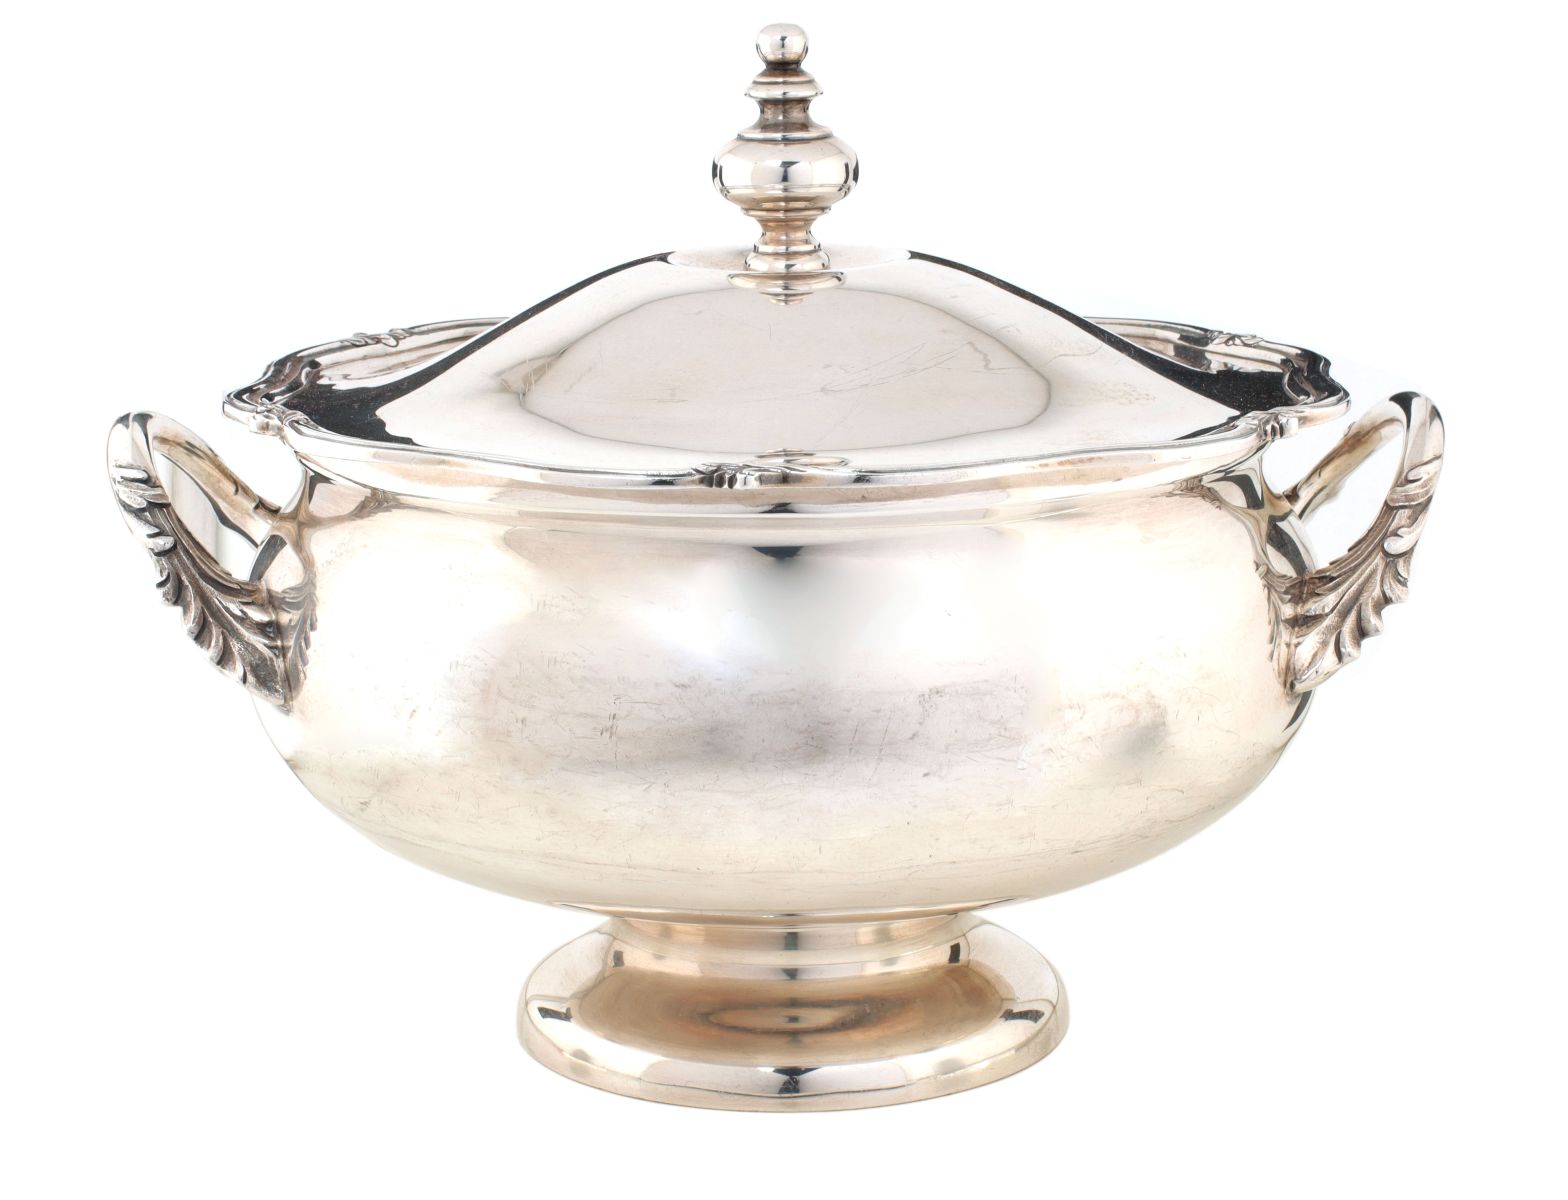 A HAMMERED MEXICAN SILVER TUREEN SIGNED ORTEGA